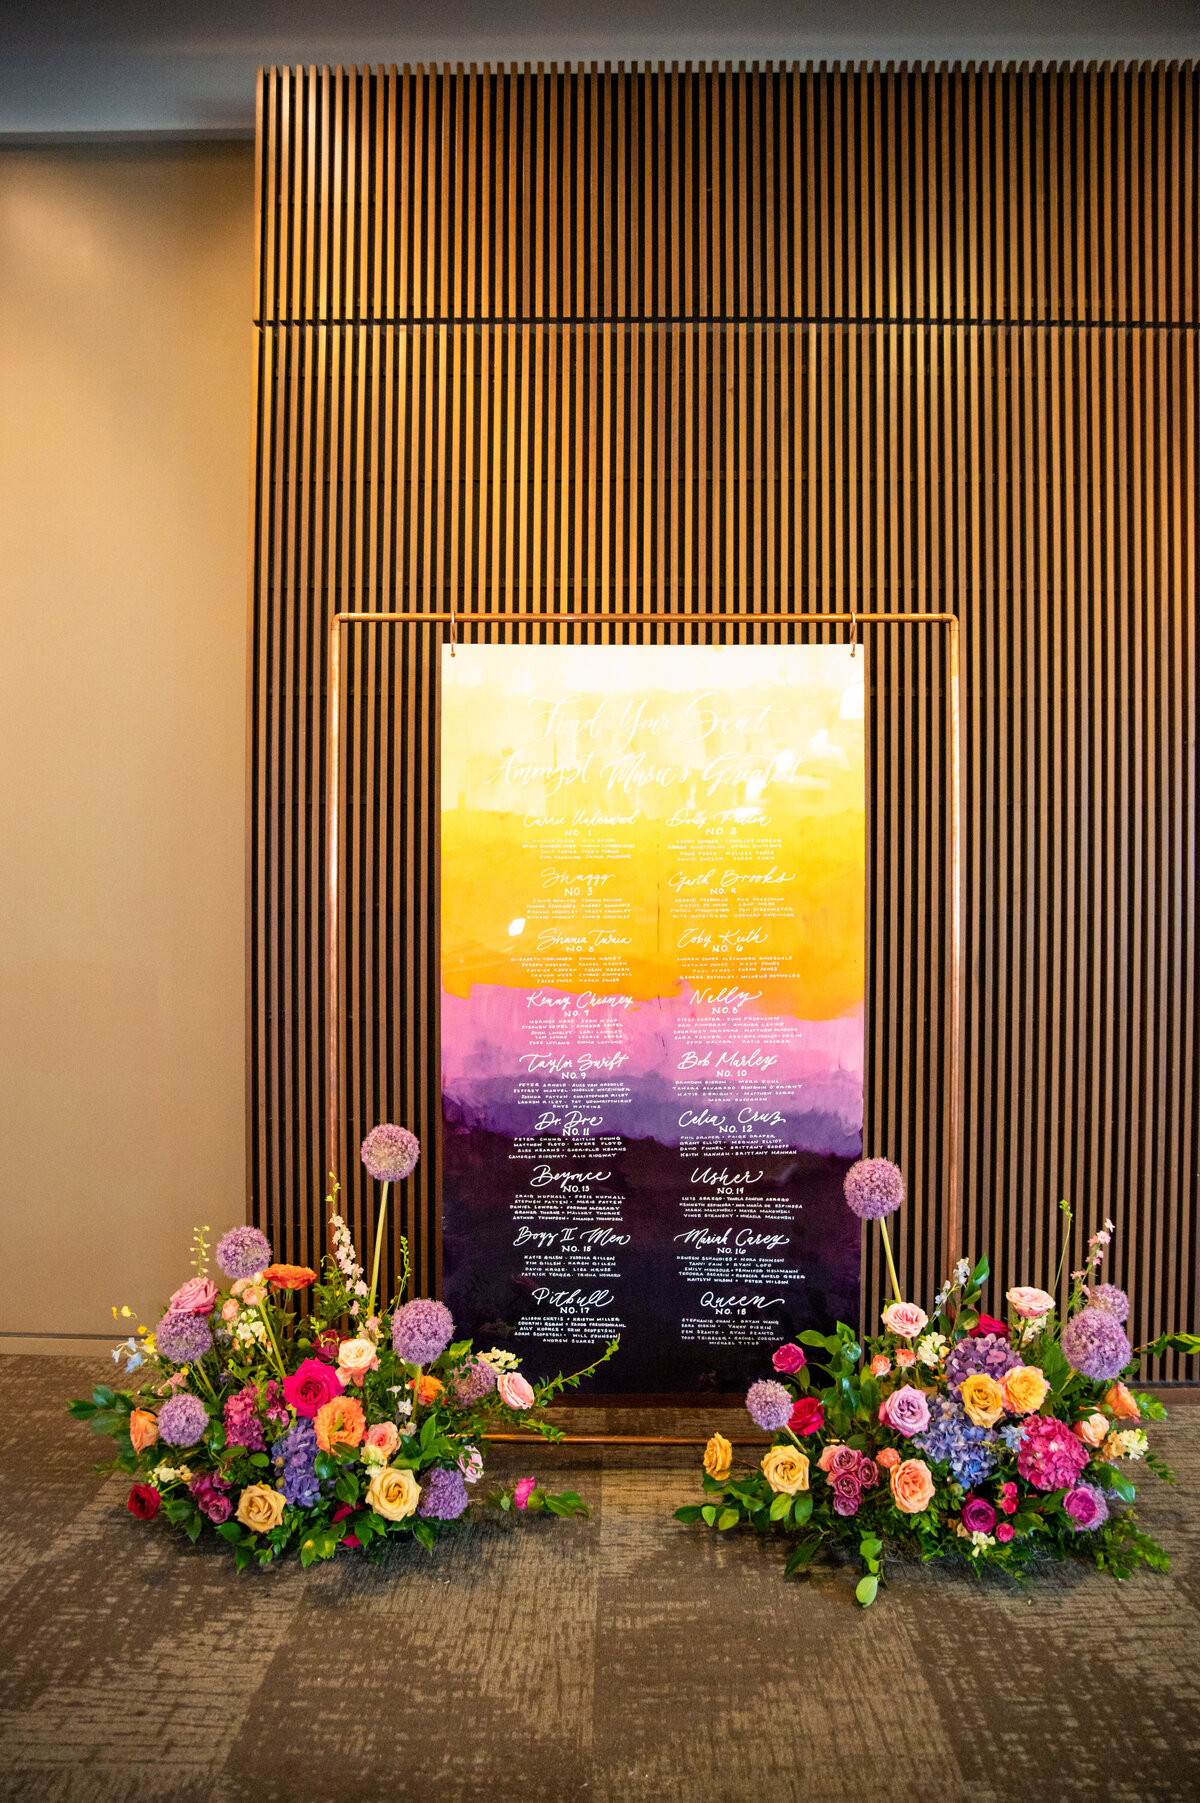 Colorful escort display with lush floral hedges composed of petal heavy roses, allium, delphinium, snapdragons, spray roses, hydrangea and garden-inspired greenery in sunset hues of pink, fuchsia, orange, golden-yellow, and lavender. Design by Rosemary and Finch in Nashville, TN.